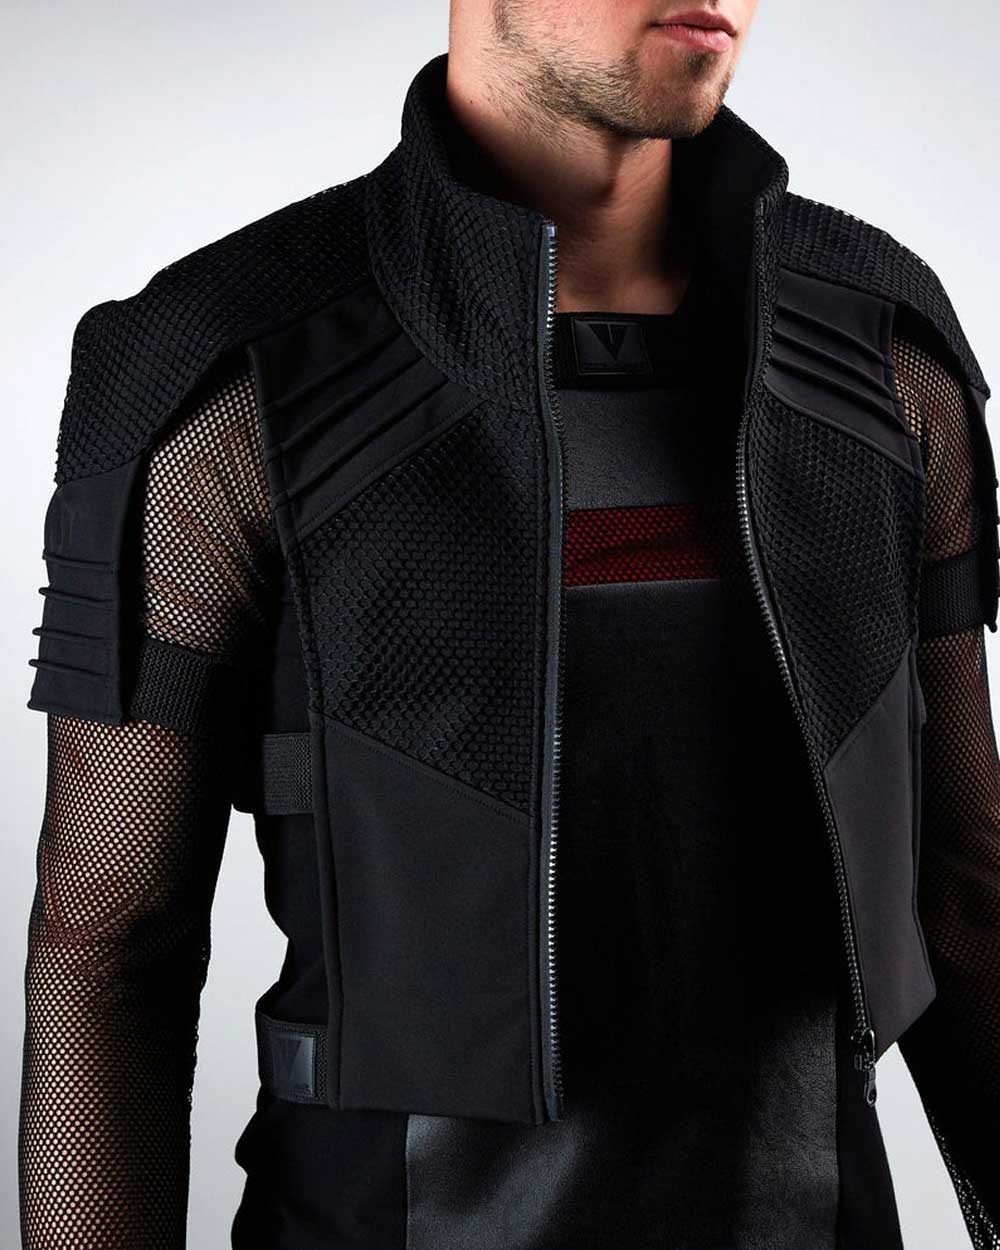 Top 14 Best Cyberpunk Clothing Brands And Online Stores (2022)